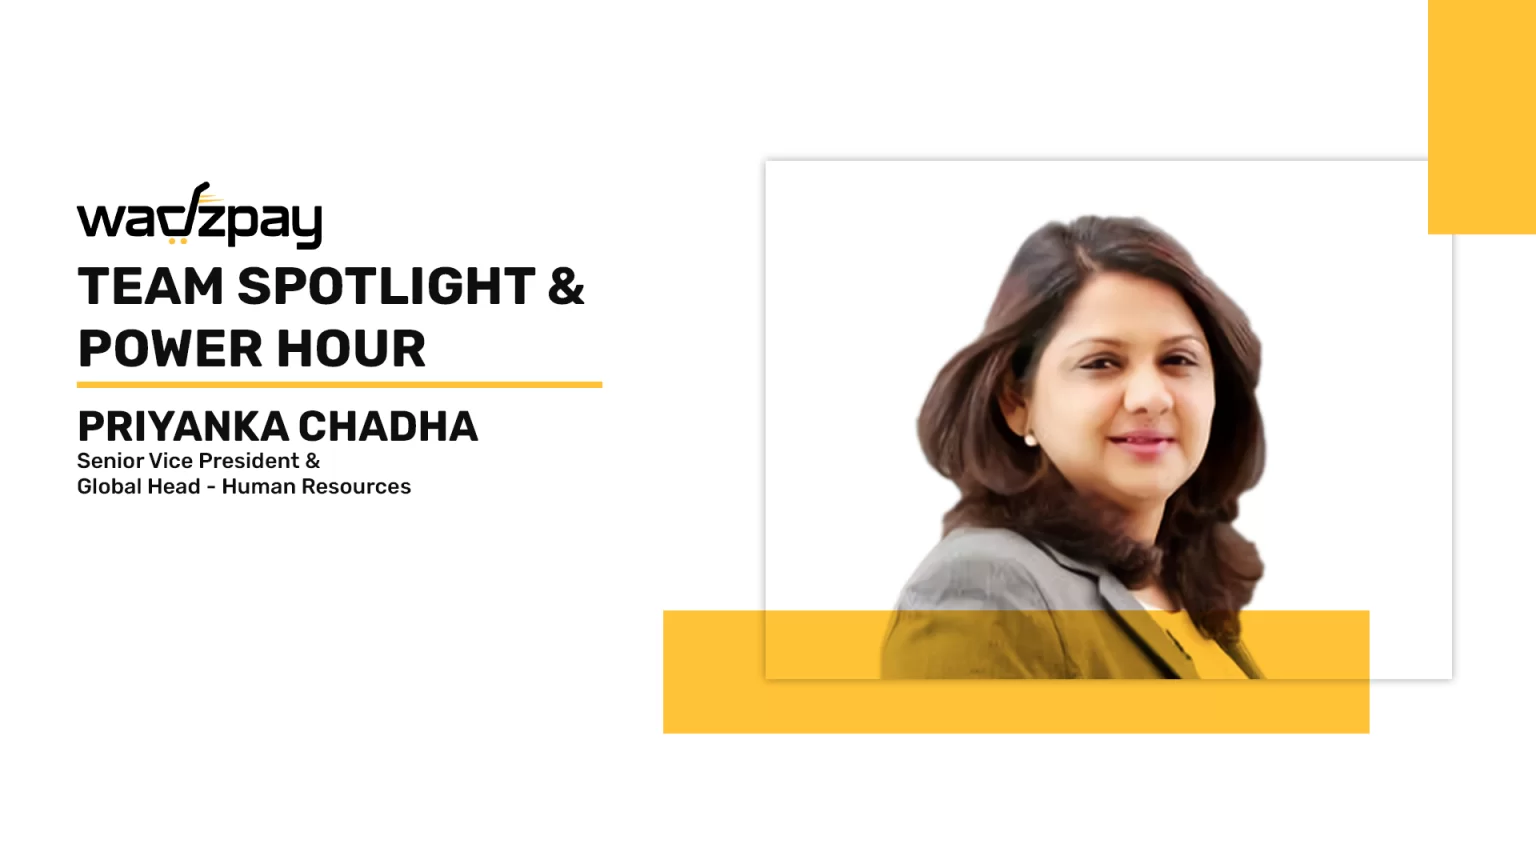 Interview: How Behaviour Impacts The Organisation, The People, and Teams. Insights from Priyanka Chadha